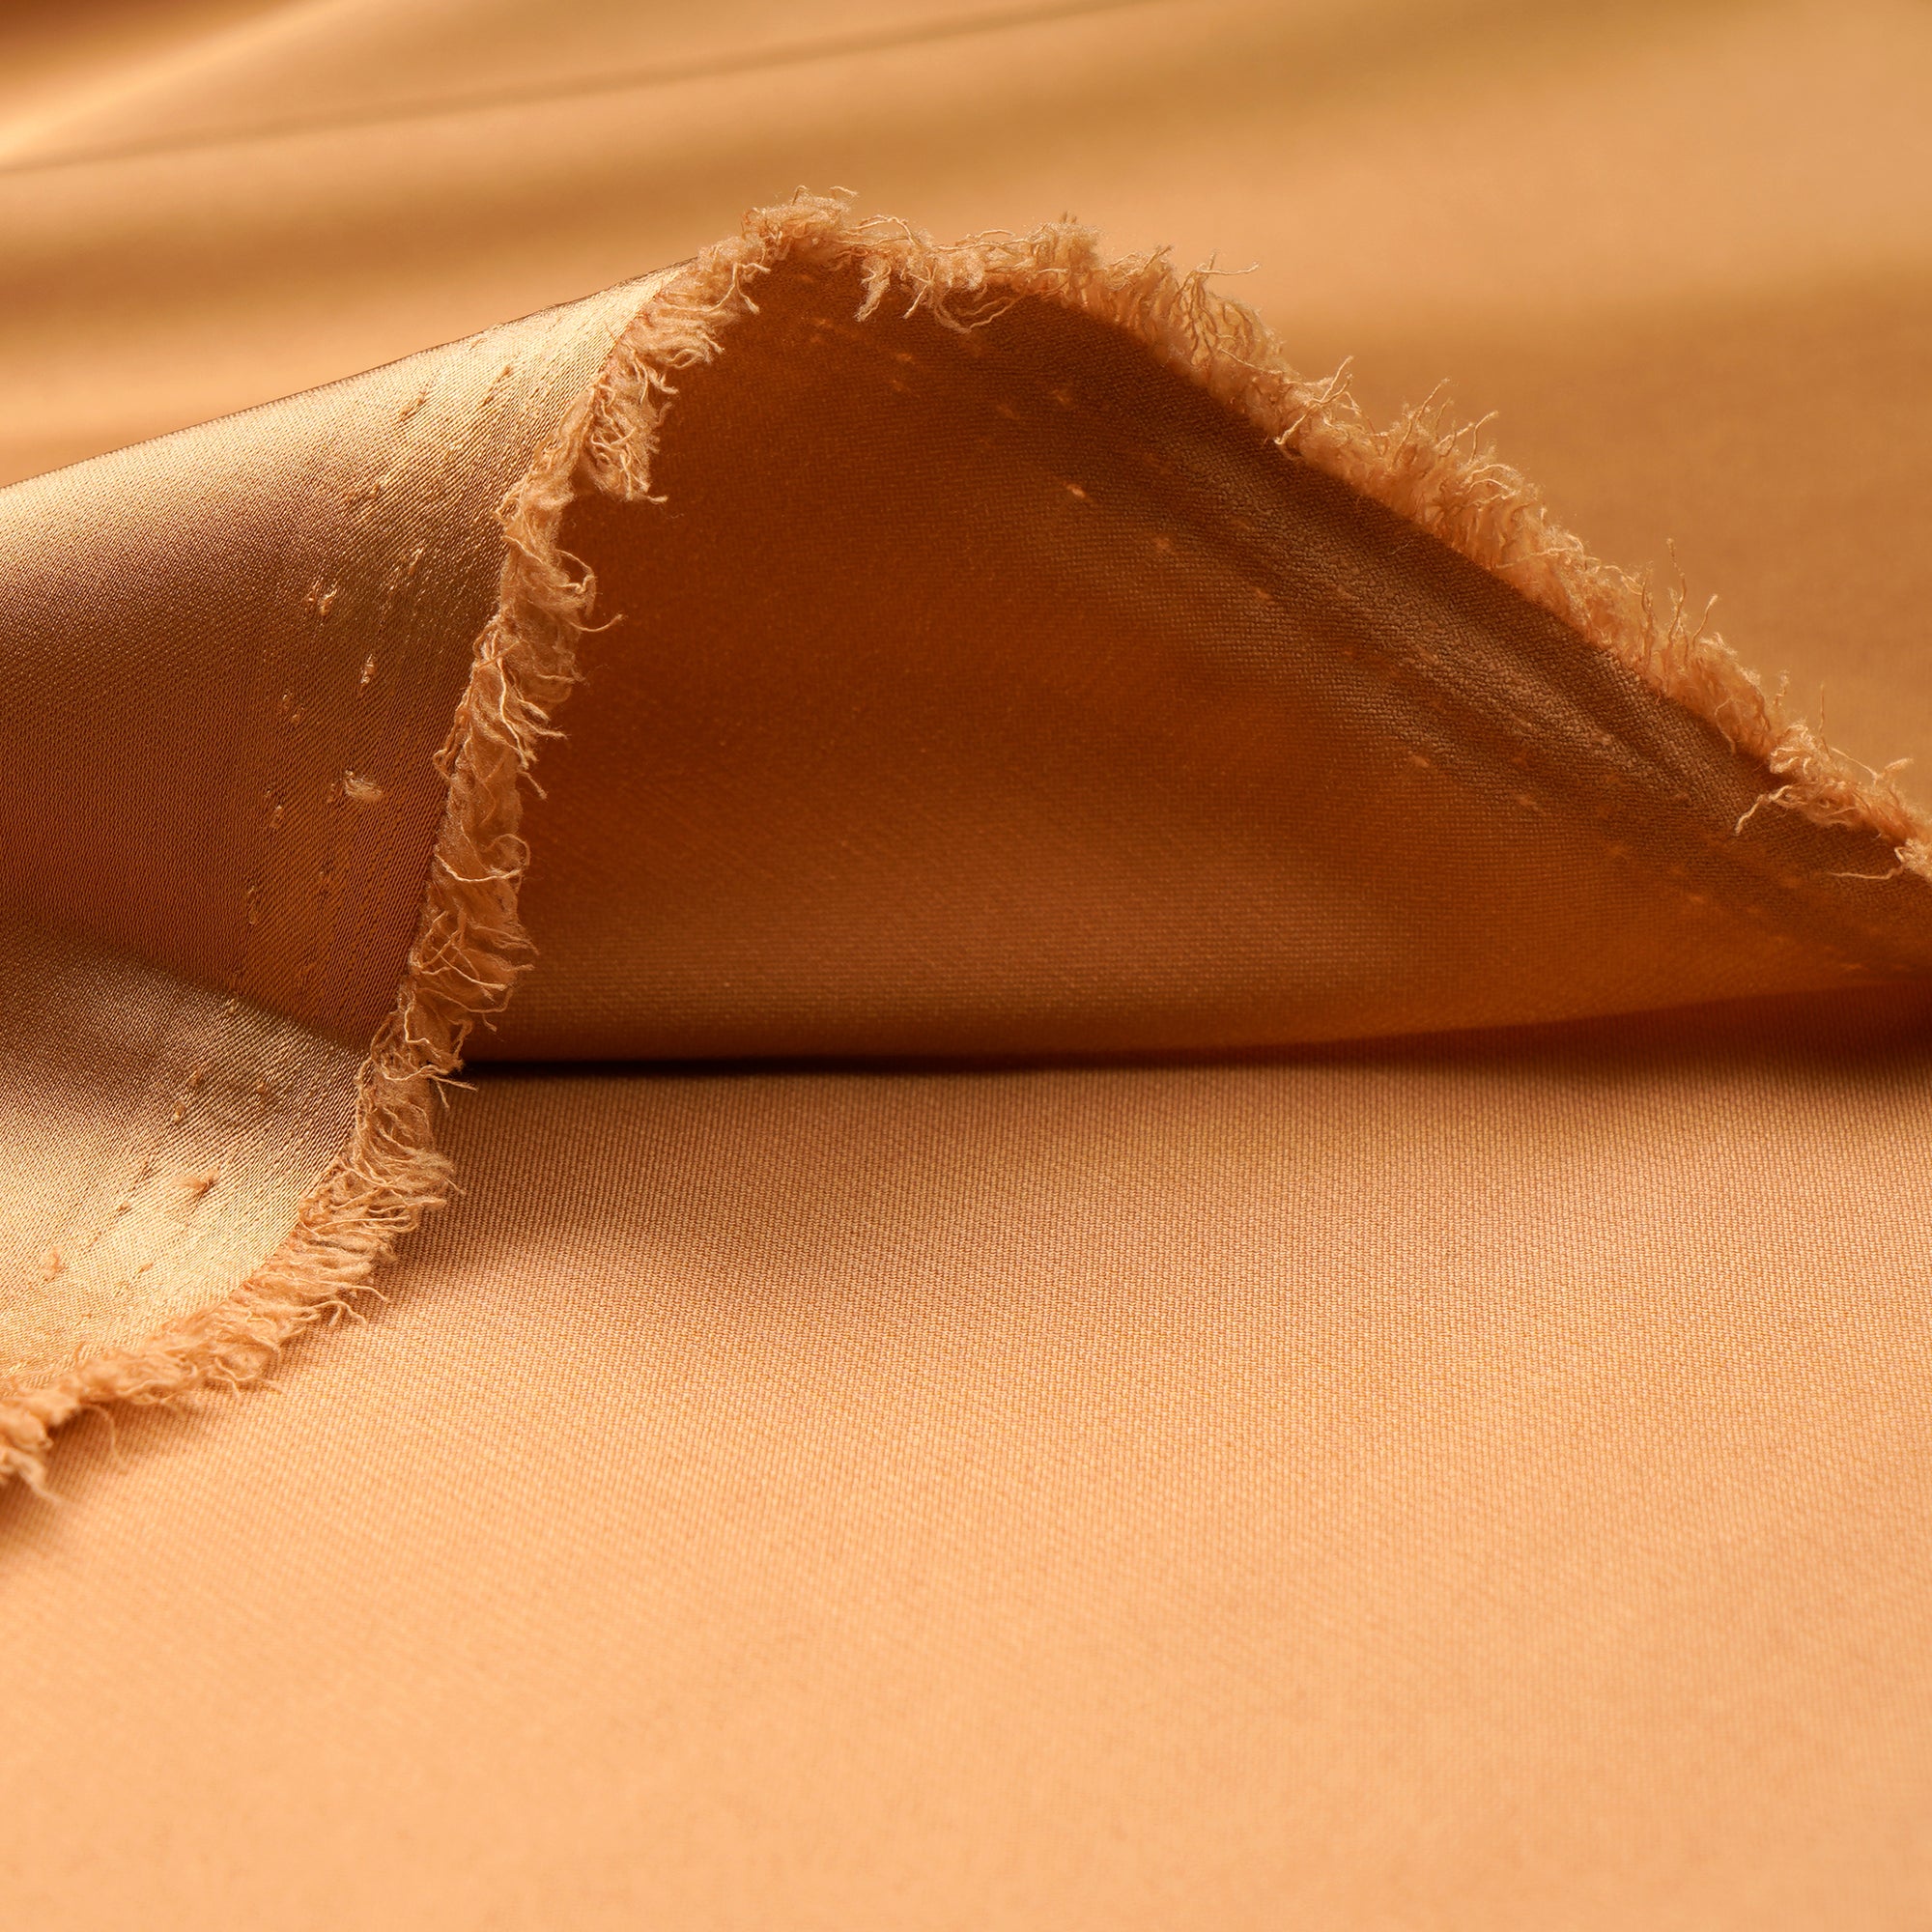 Golden Apricot Solid Dyed Imported Armani Satin Fabric (60" Width)